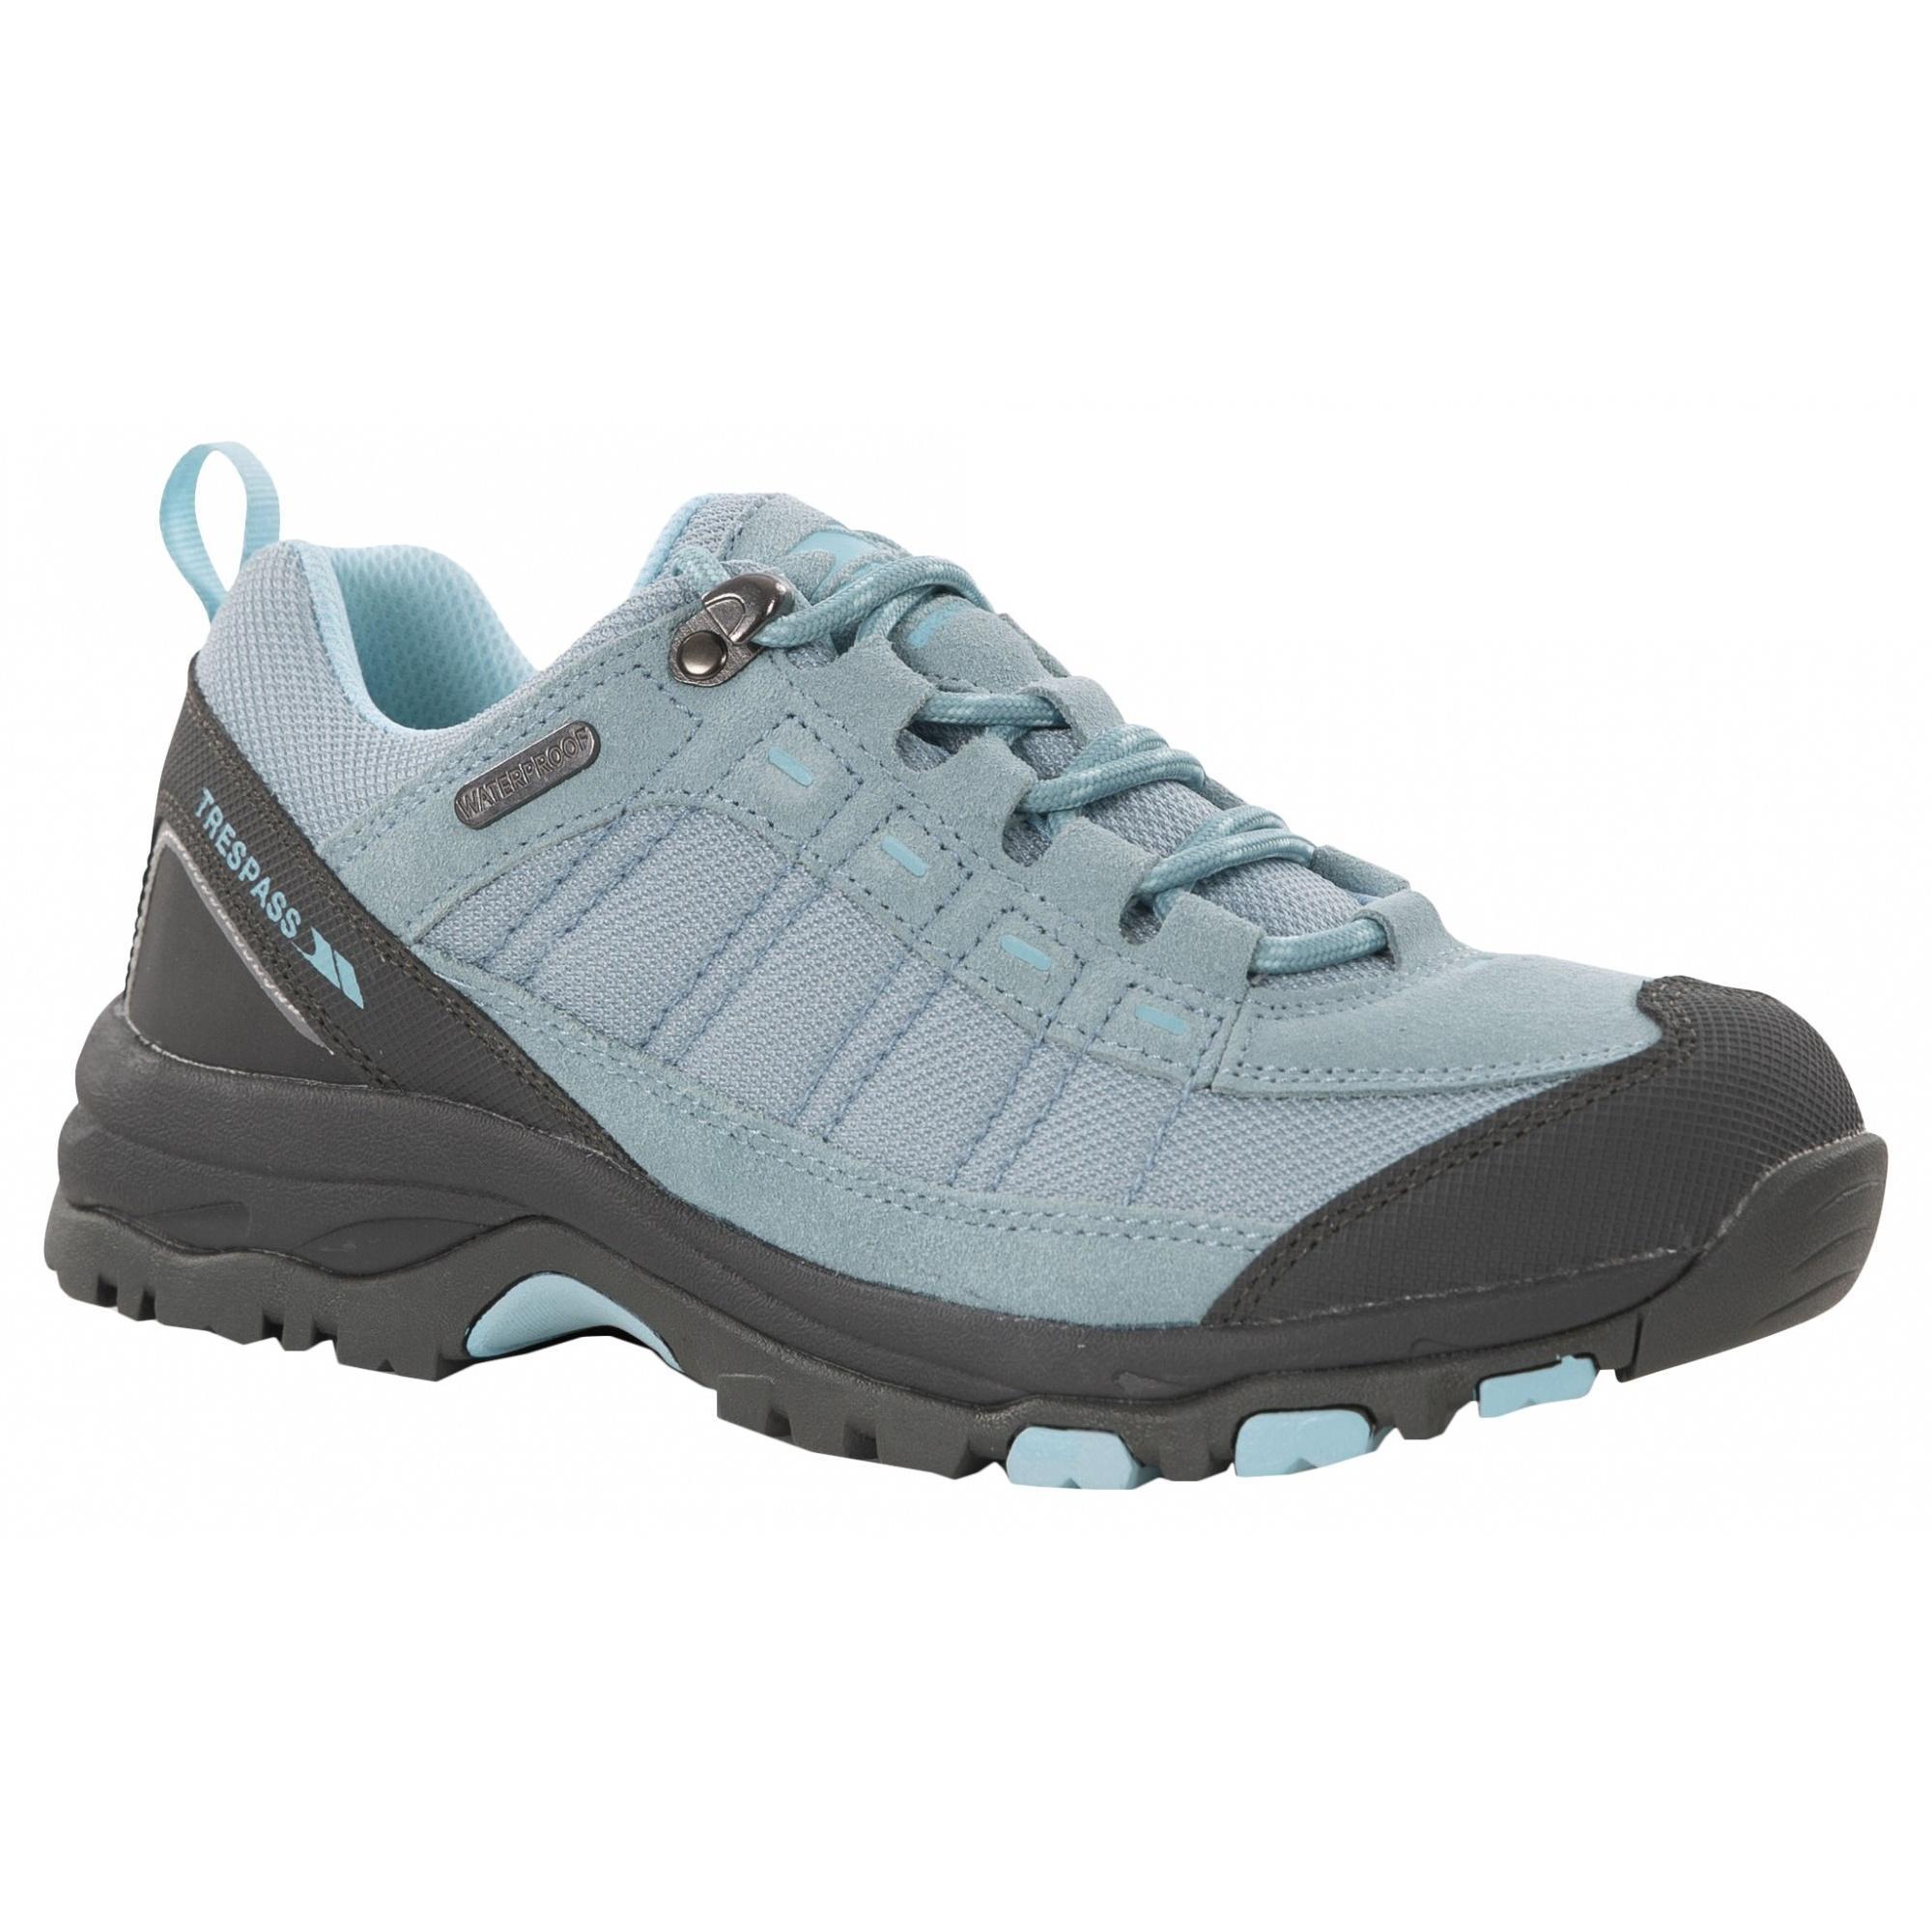 Trespass Womens/Ladies Scree Lace Up Technical Walking Shoes (Sea Blue) (5 UK)